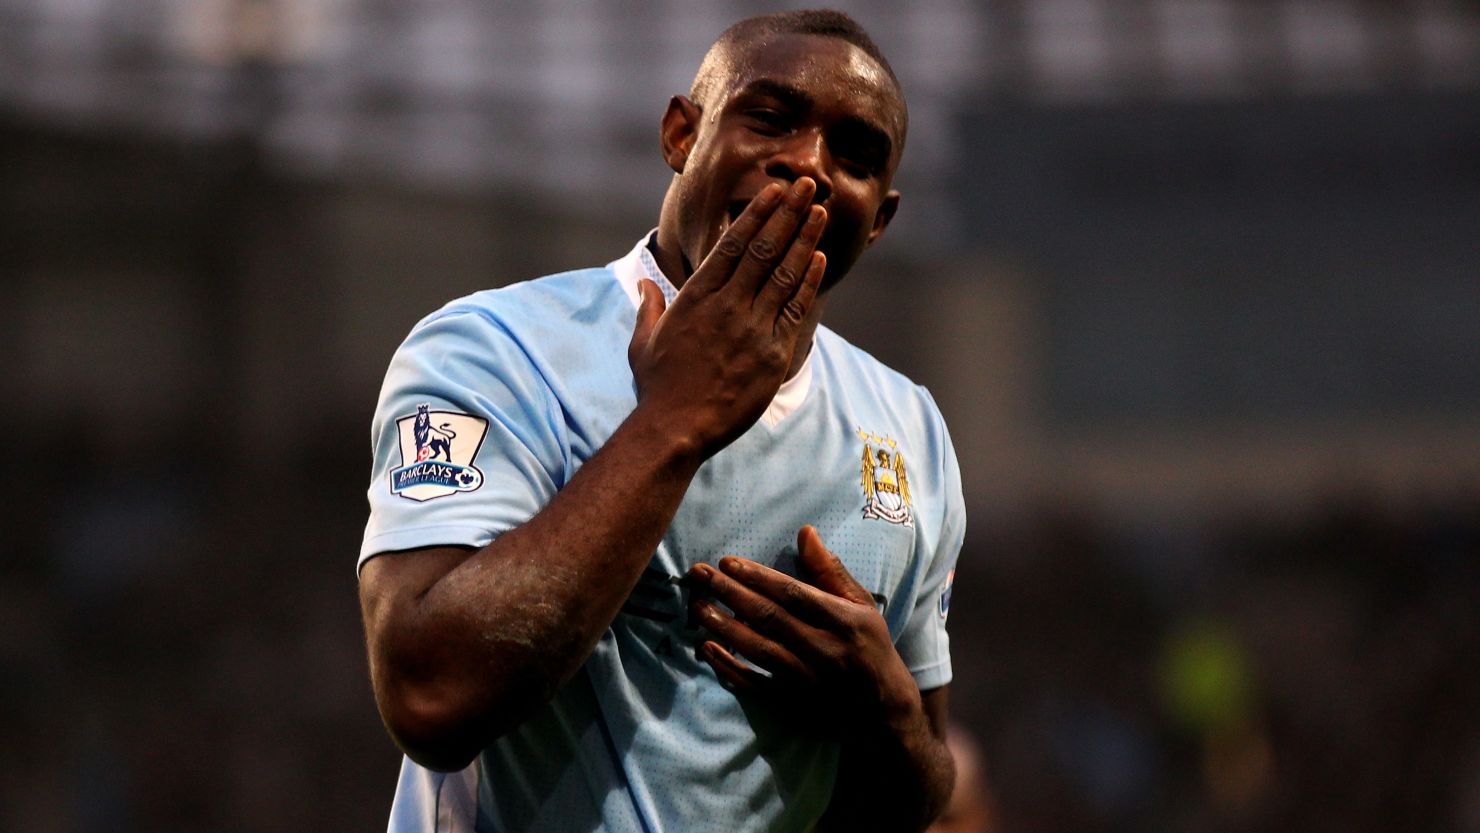 Micah Richards celebrates after scoring Manchester City's second goal against Newcastle United on Saturday.